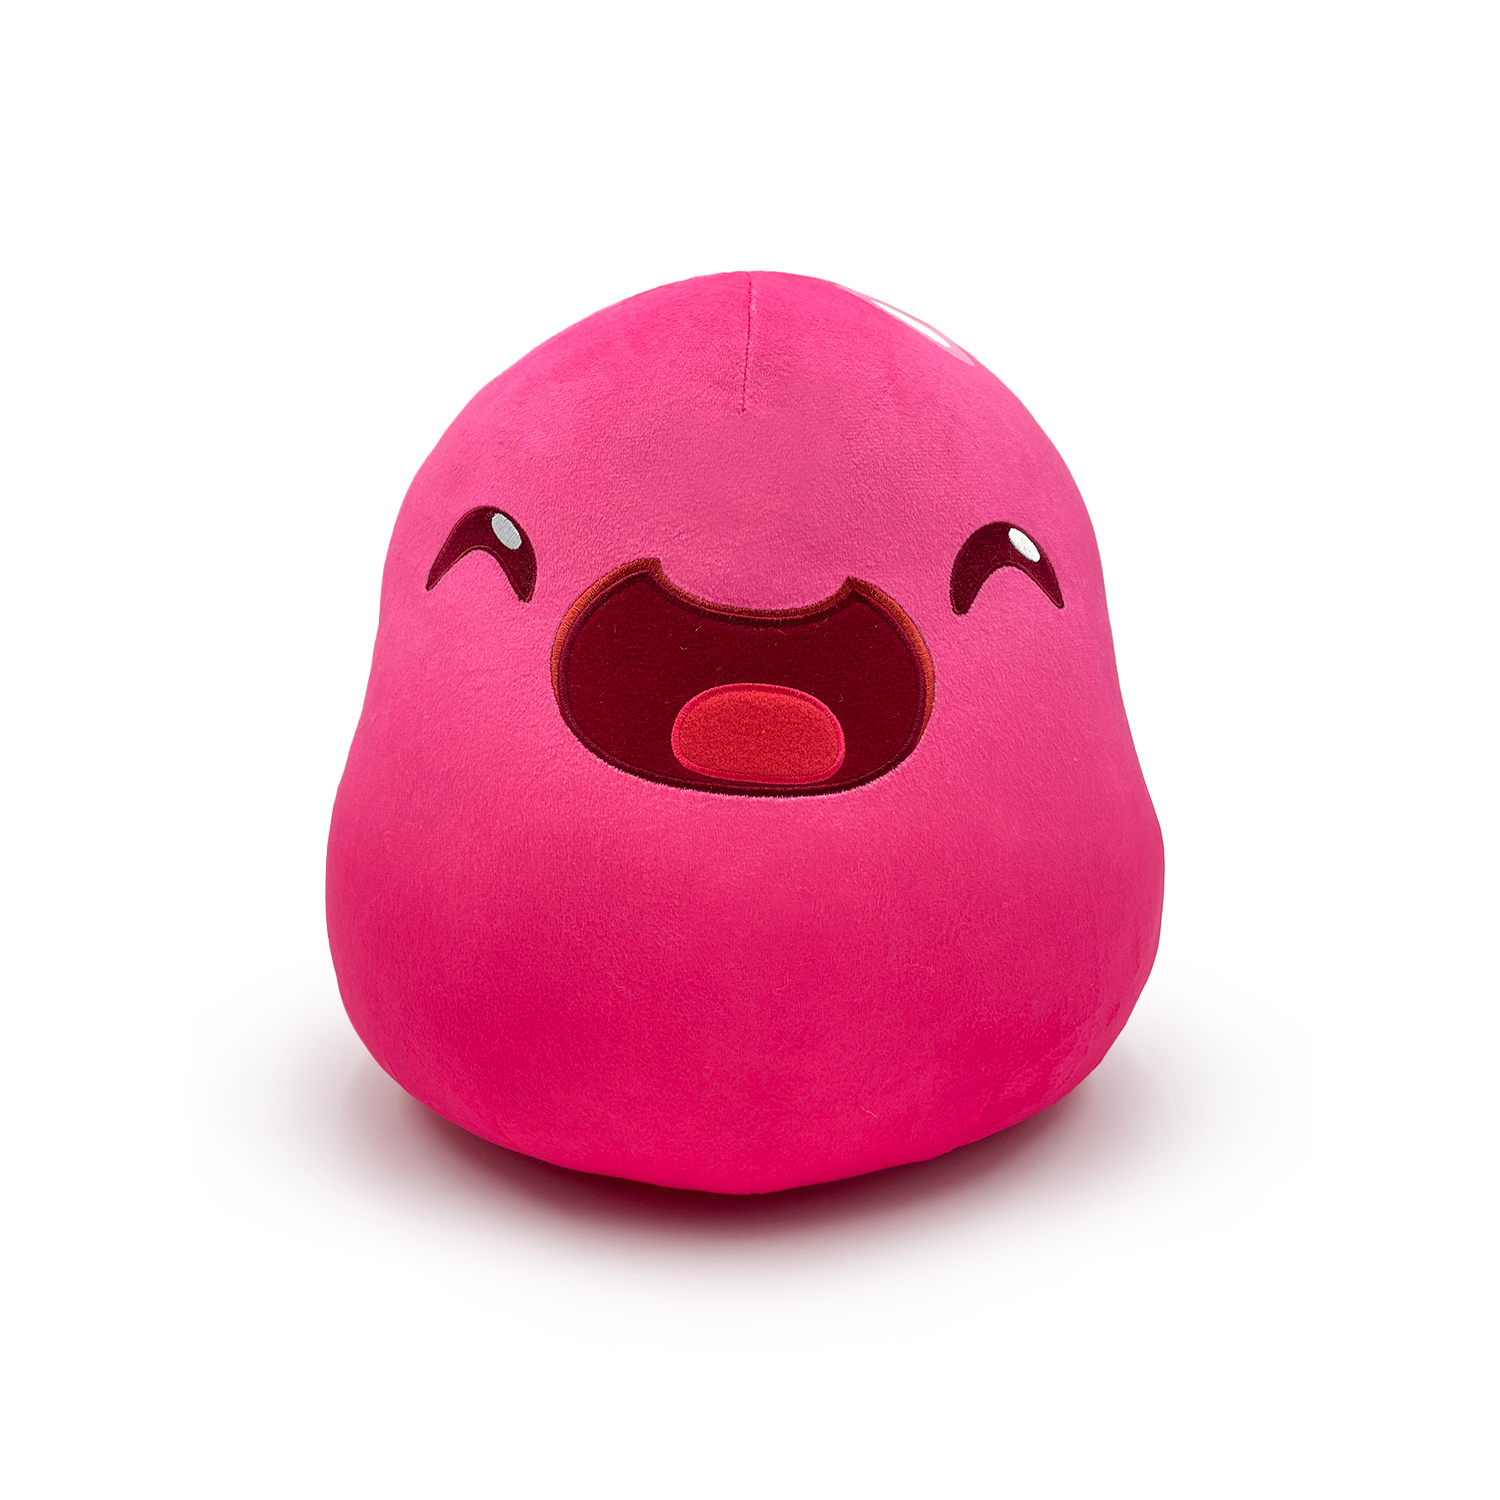  Slime Rancher Glitch Tabby Slime Plush Collectible, Official Slime  Rancher Bean Bag Plush Doll